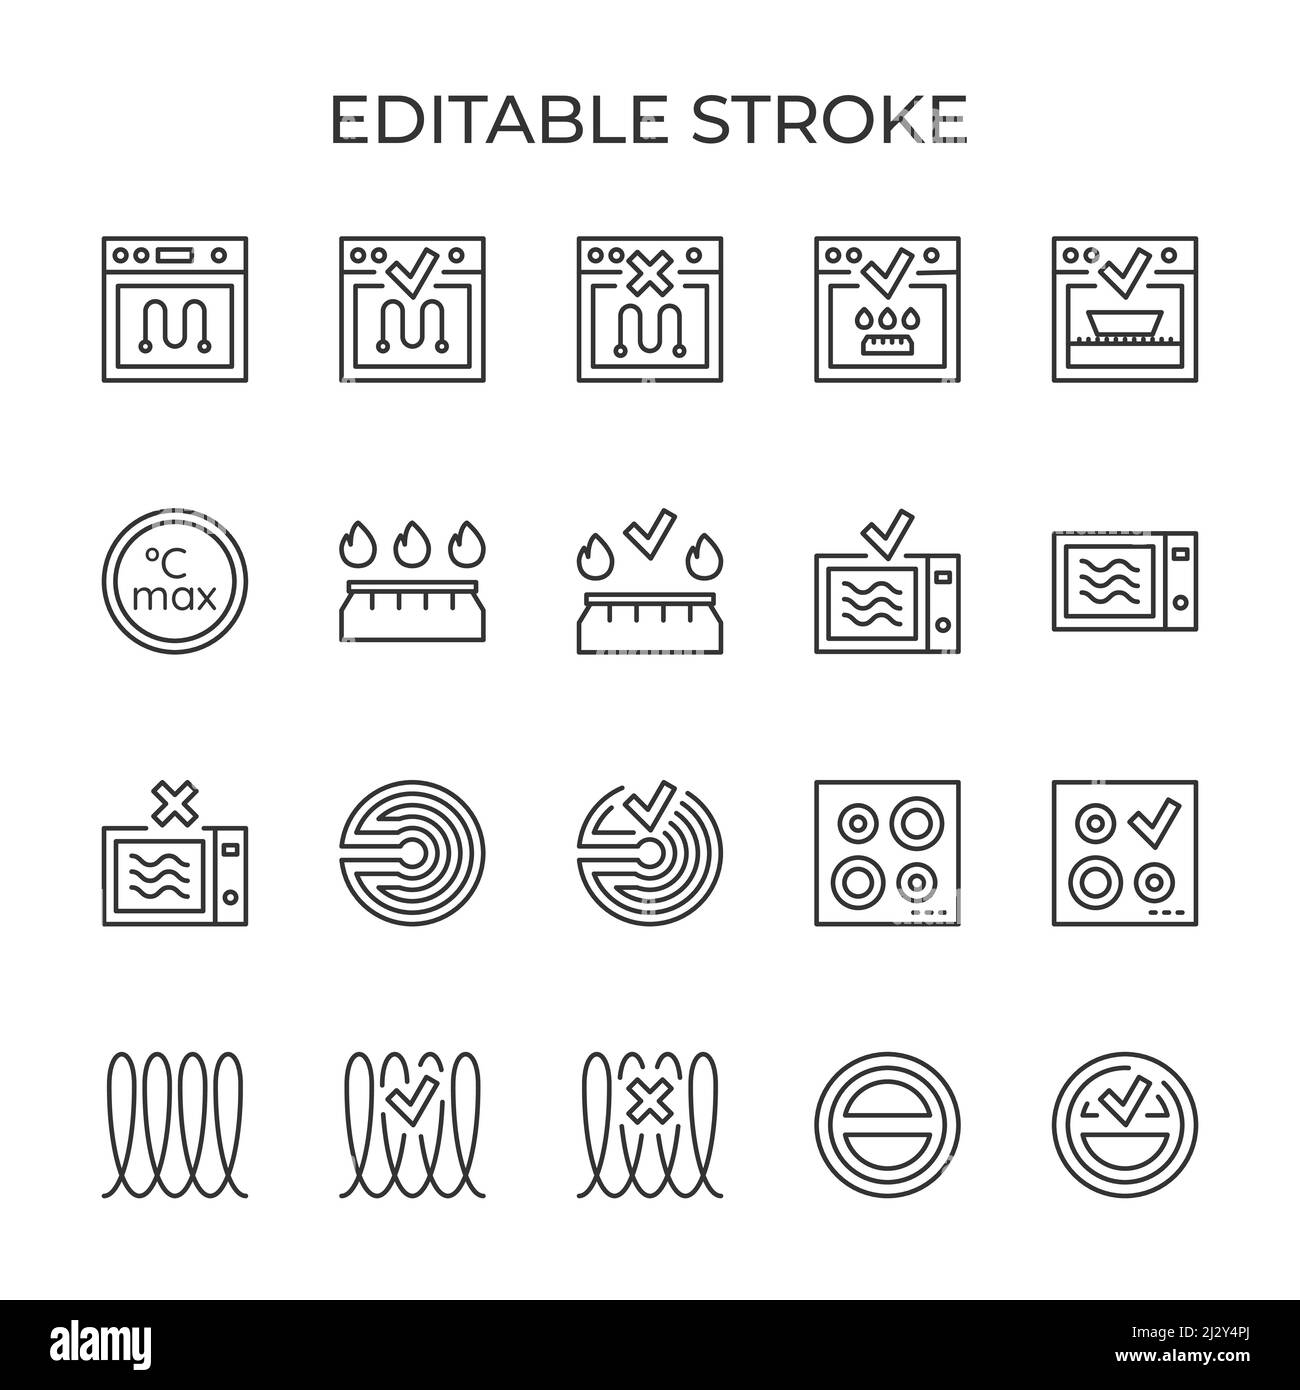 Metallic tableware symbols. Suitability for cookware gas, induction and ceramic stoves set of linear icons. Vector illustration. Stock Vector